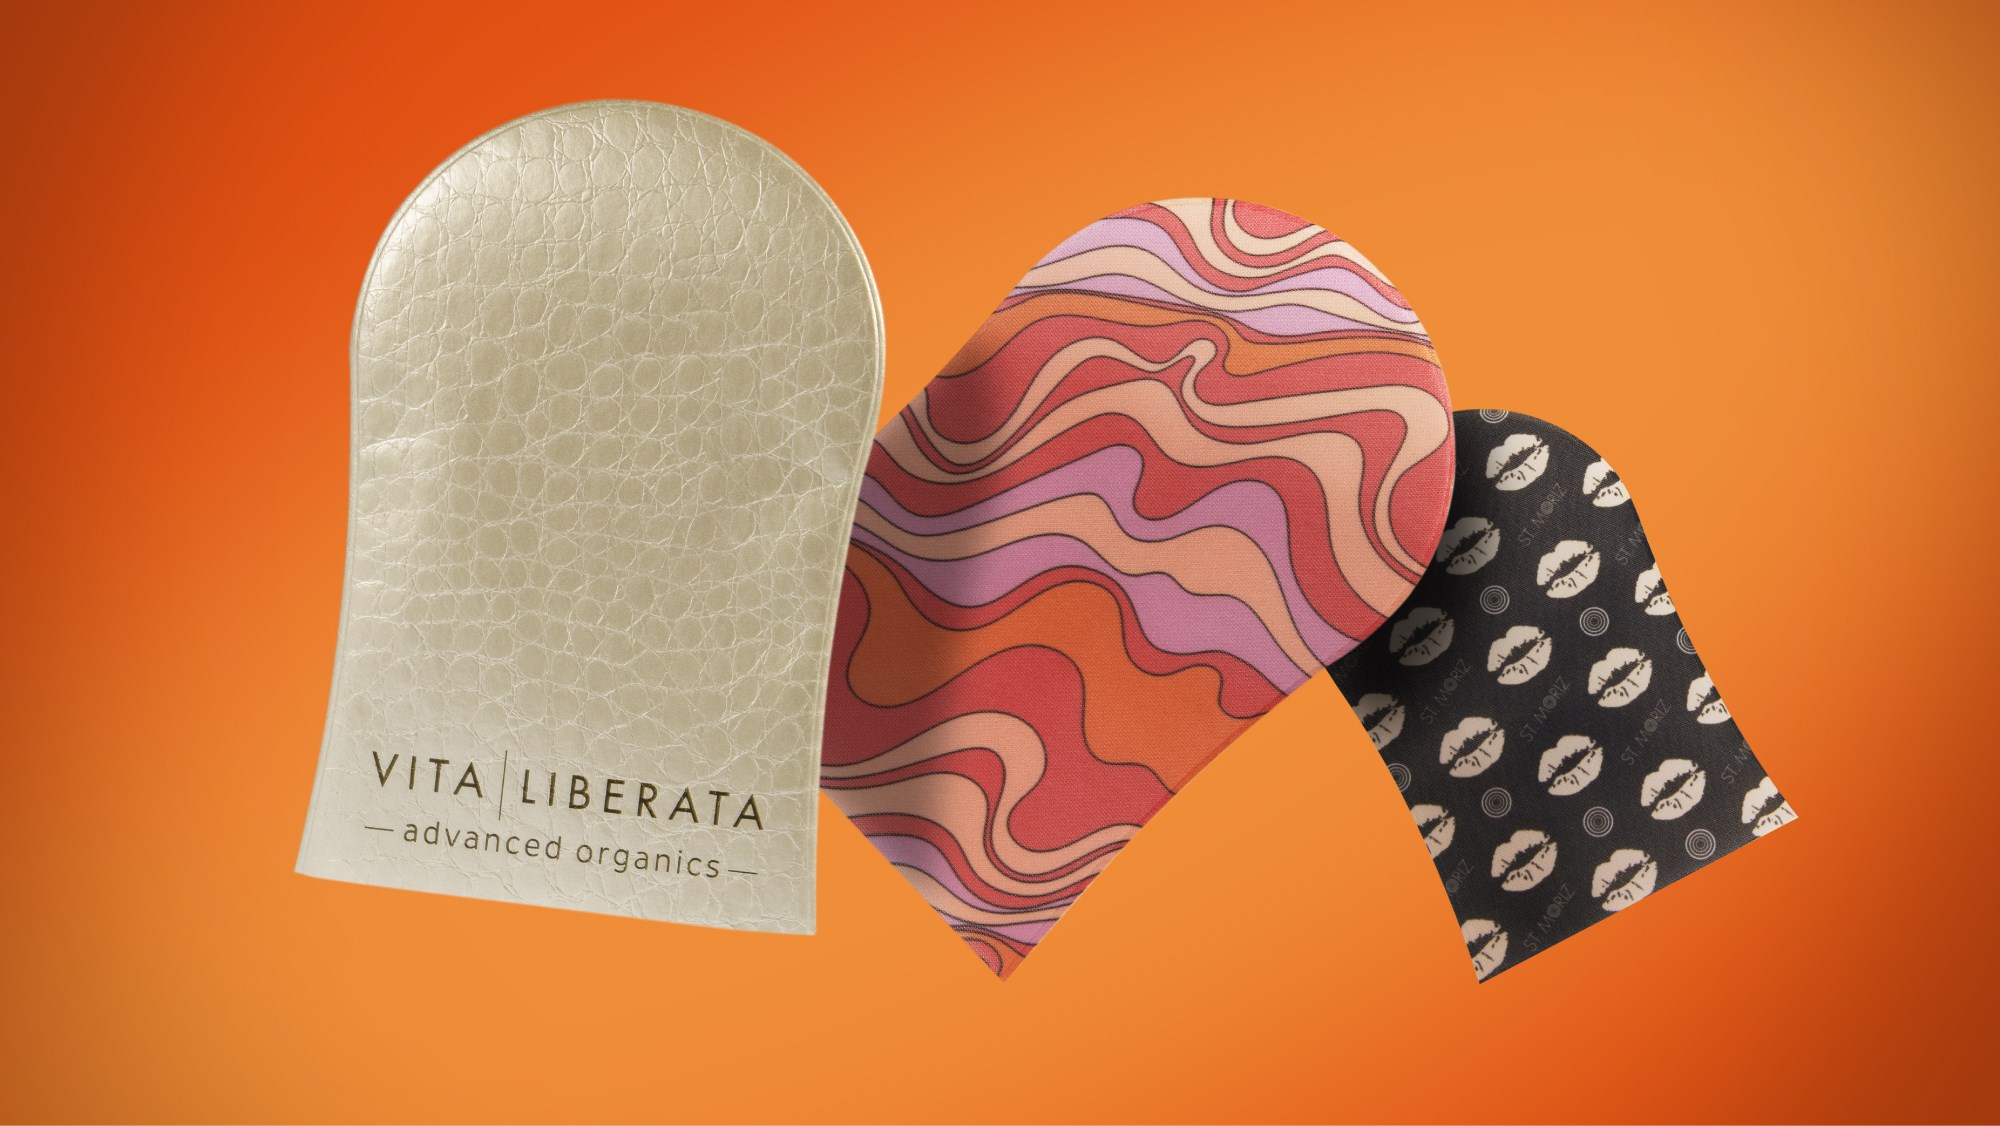 image: three tanning mitts of different designs on an orange background